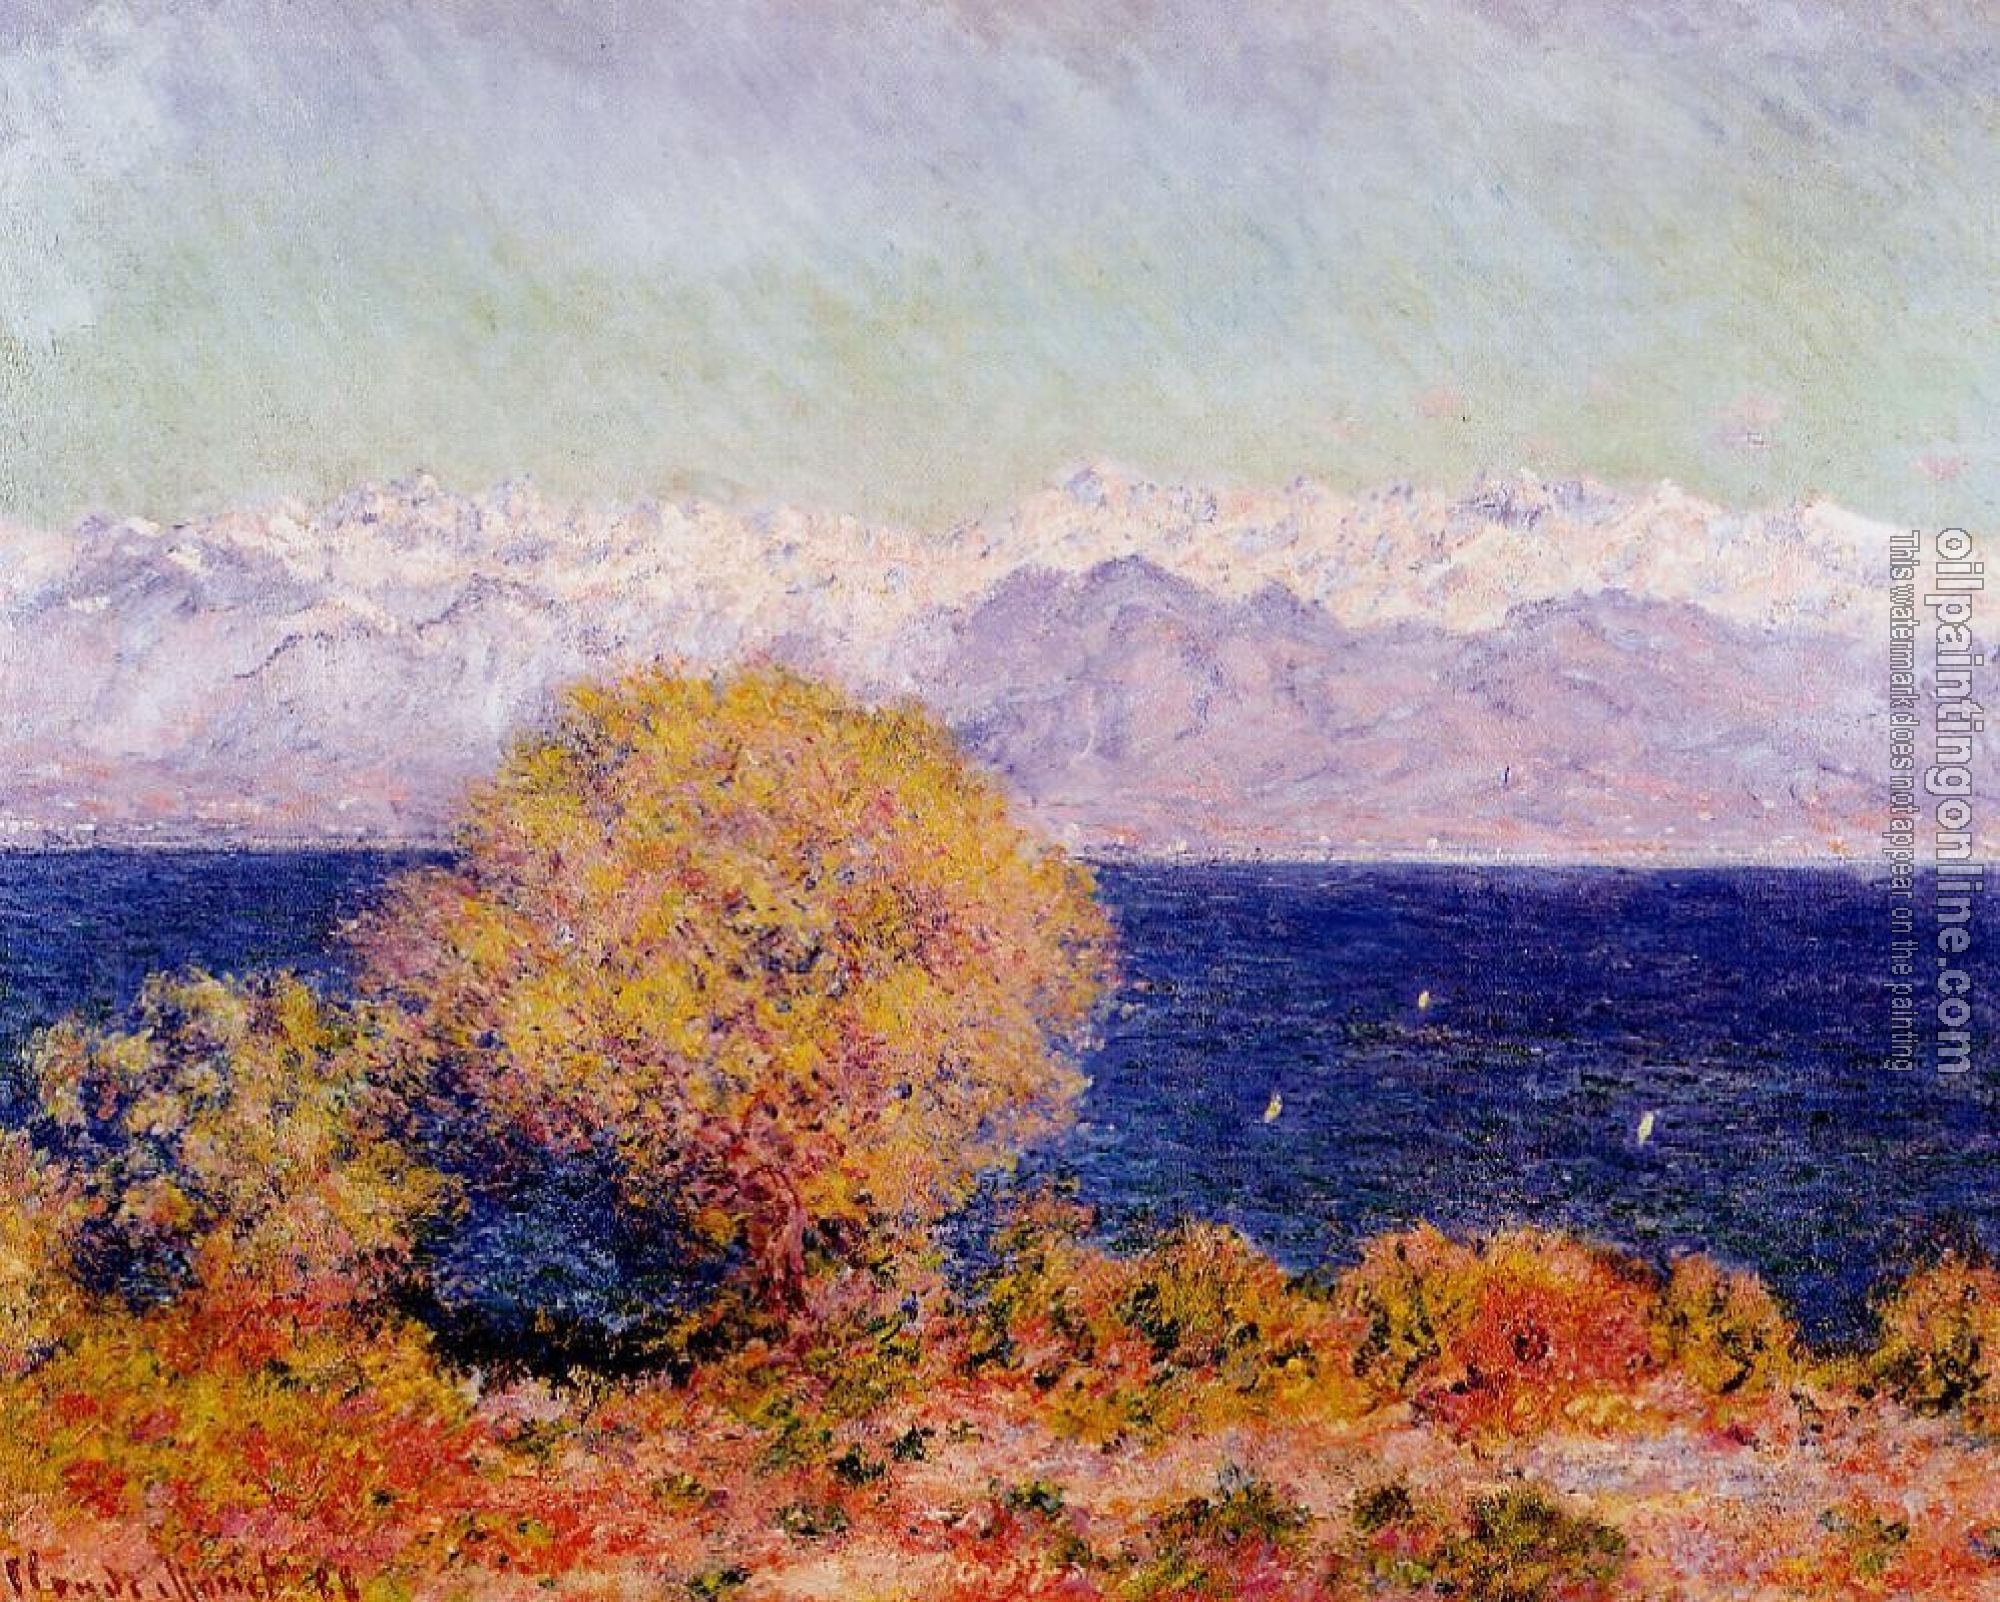 Monet, Claude Oscar - View of the Bay and Maritime Alps at Antibes